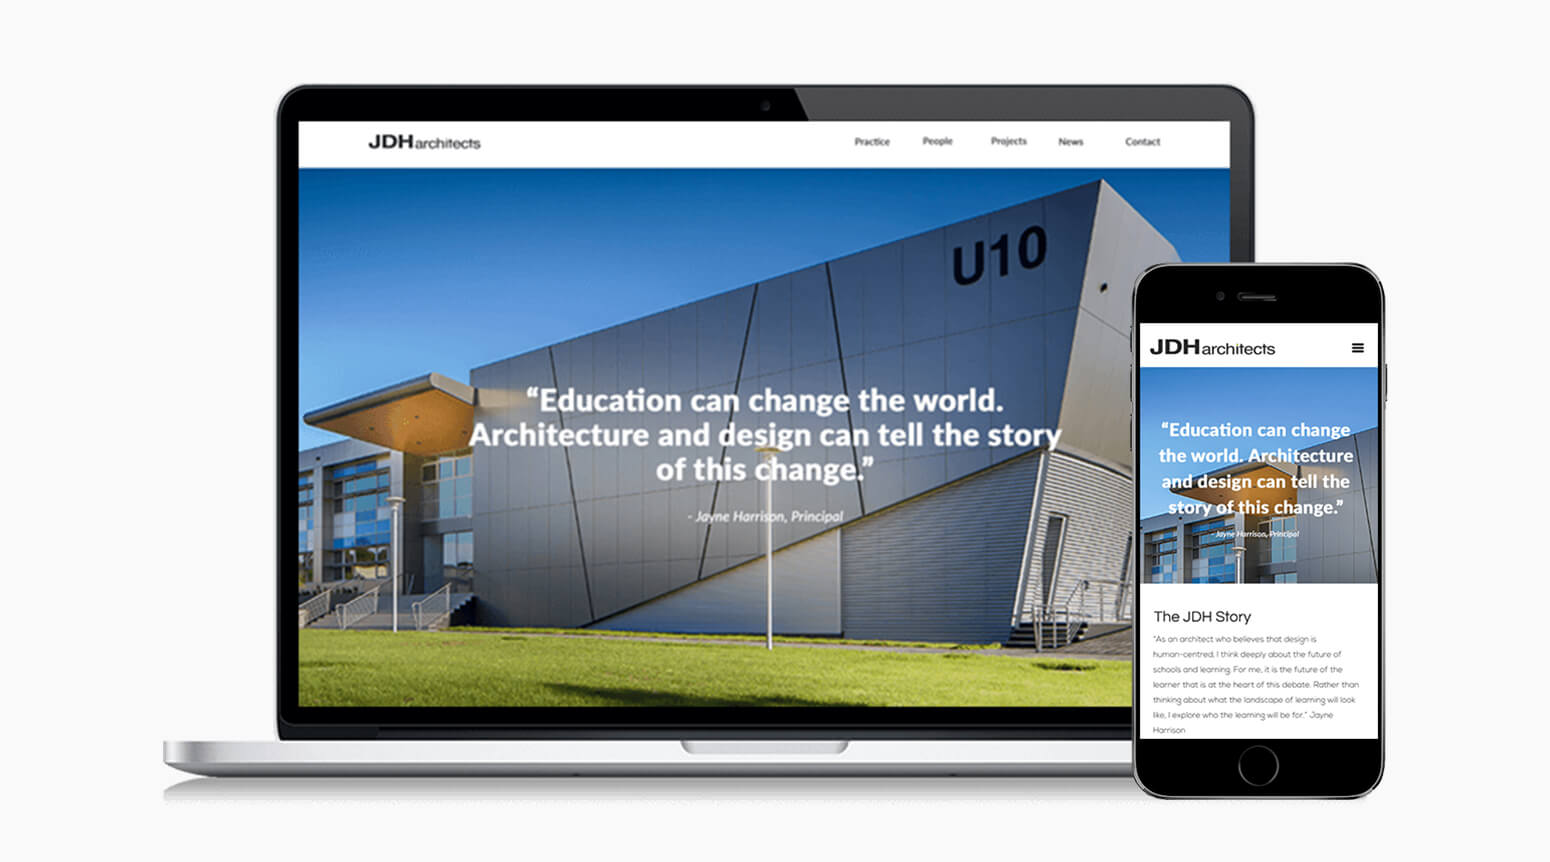 JDH Architects's designed website on computer and mobile screens to show responsiveness